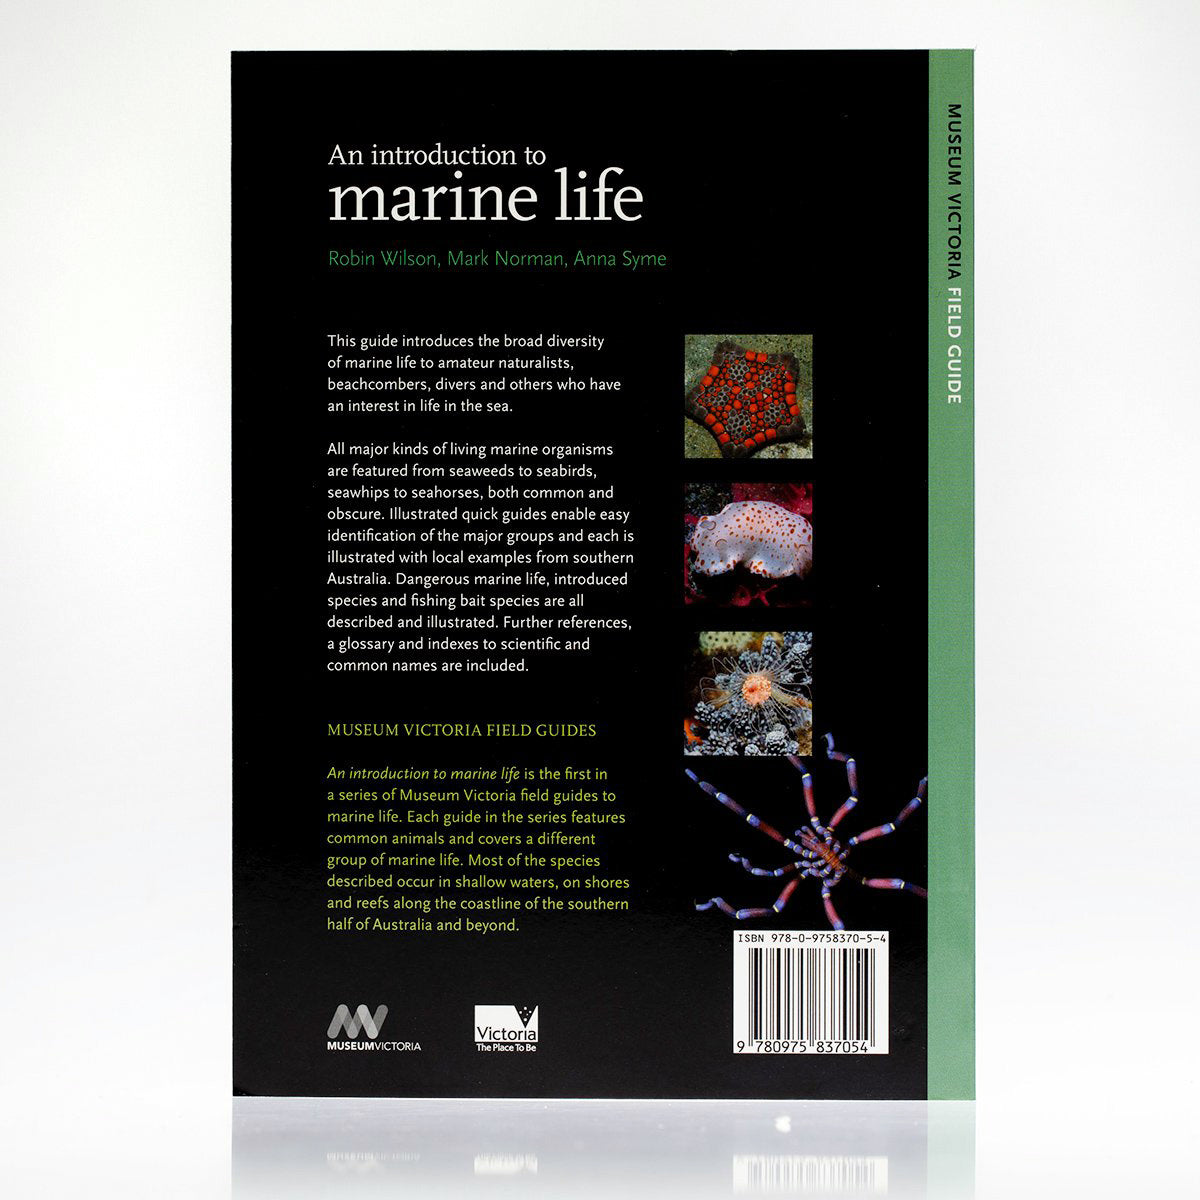 An Introduction to Marine Life